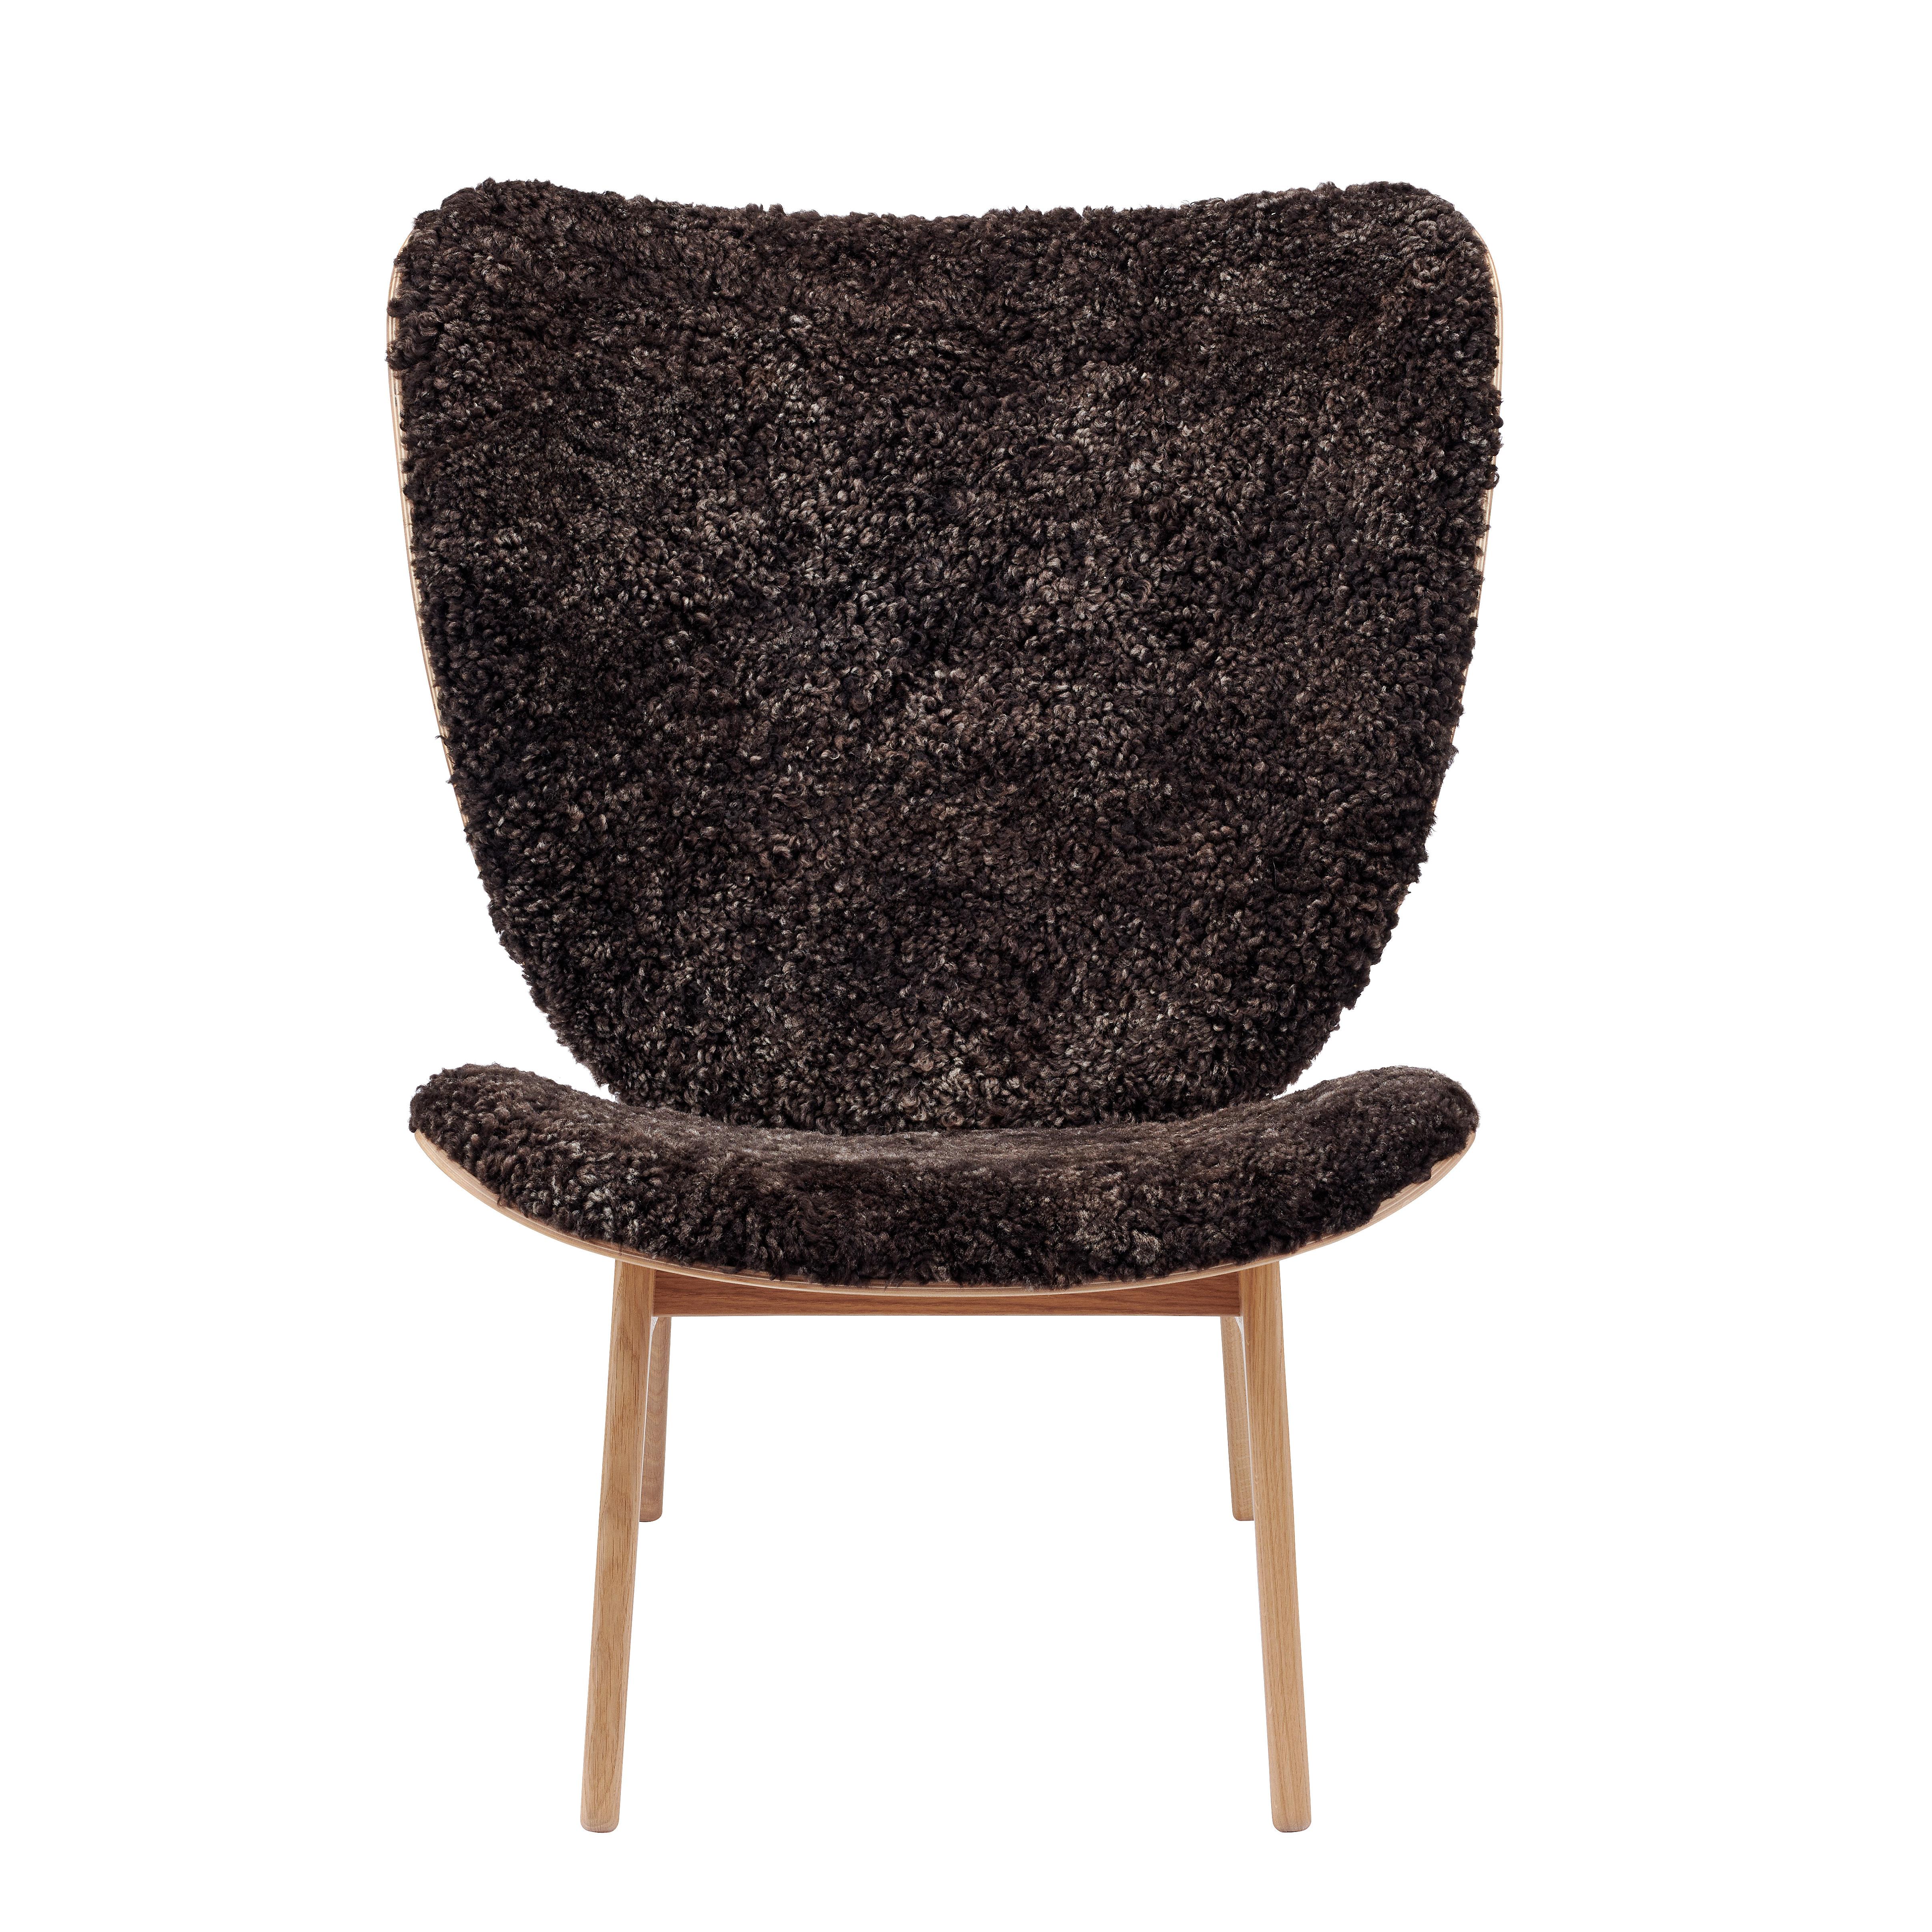 Elephant lounge chair 
Signed by Kristian Sofus Hansen and Tommy Hyldahl for Norr11, 2017

Model shown on the picture:
Wood: Natural Oak
Fabric: Sheepskin Espresso

Wood types available: natural oak / light smoked oak / dark smoked oak / black